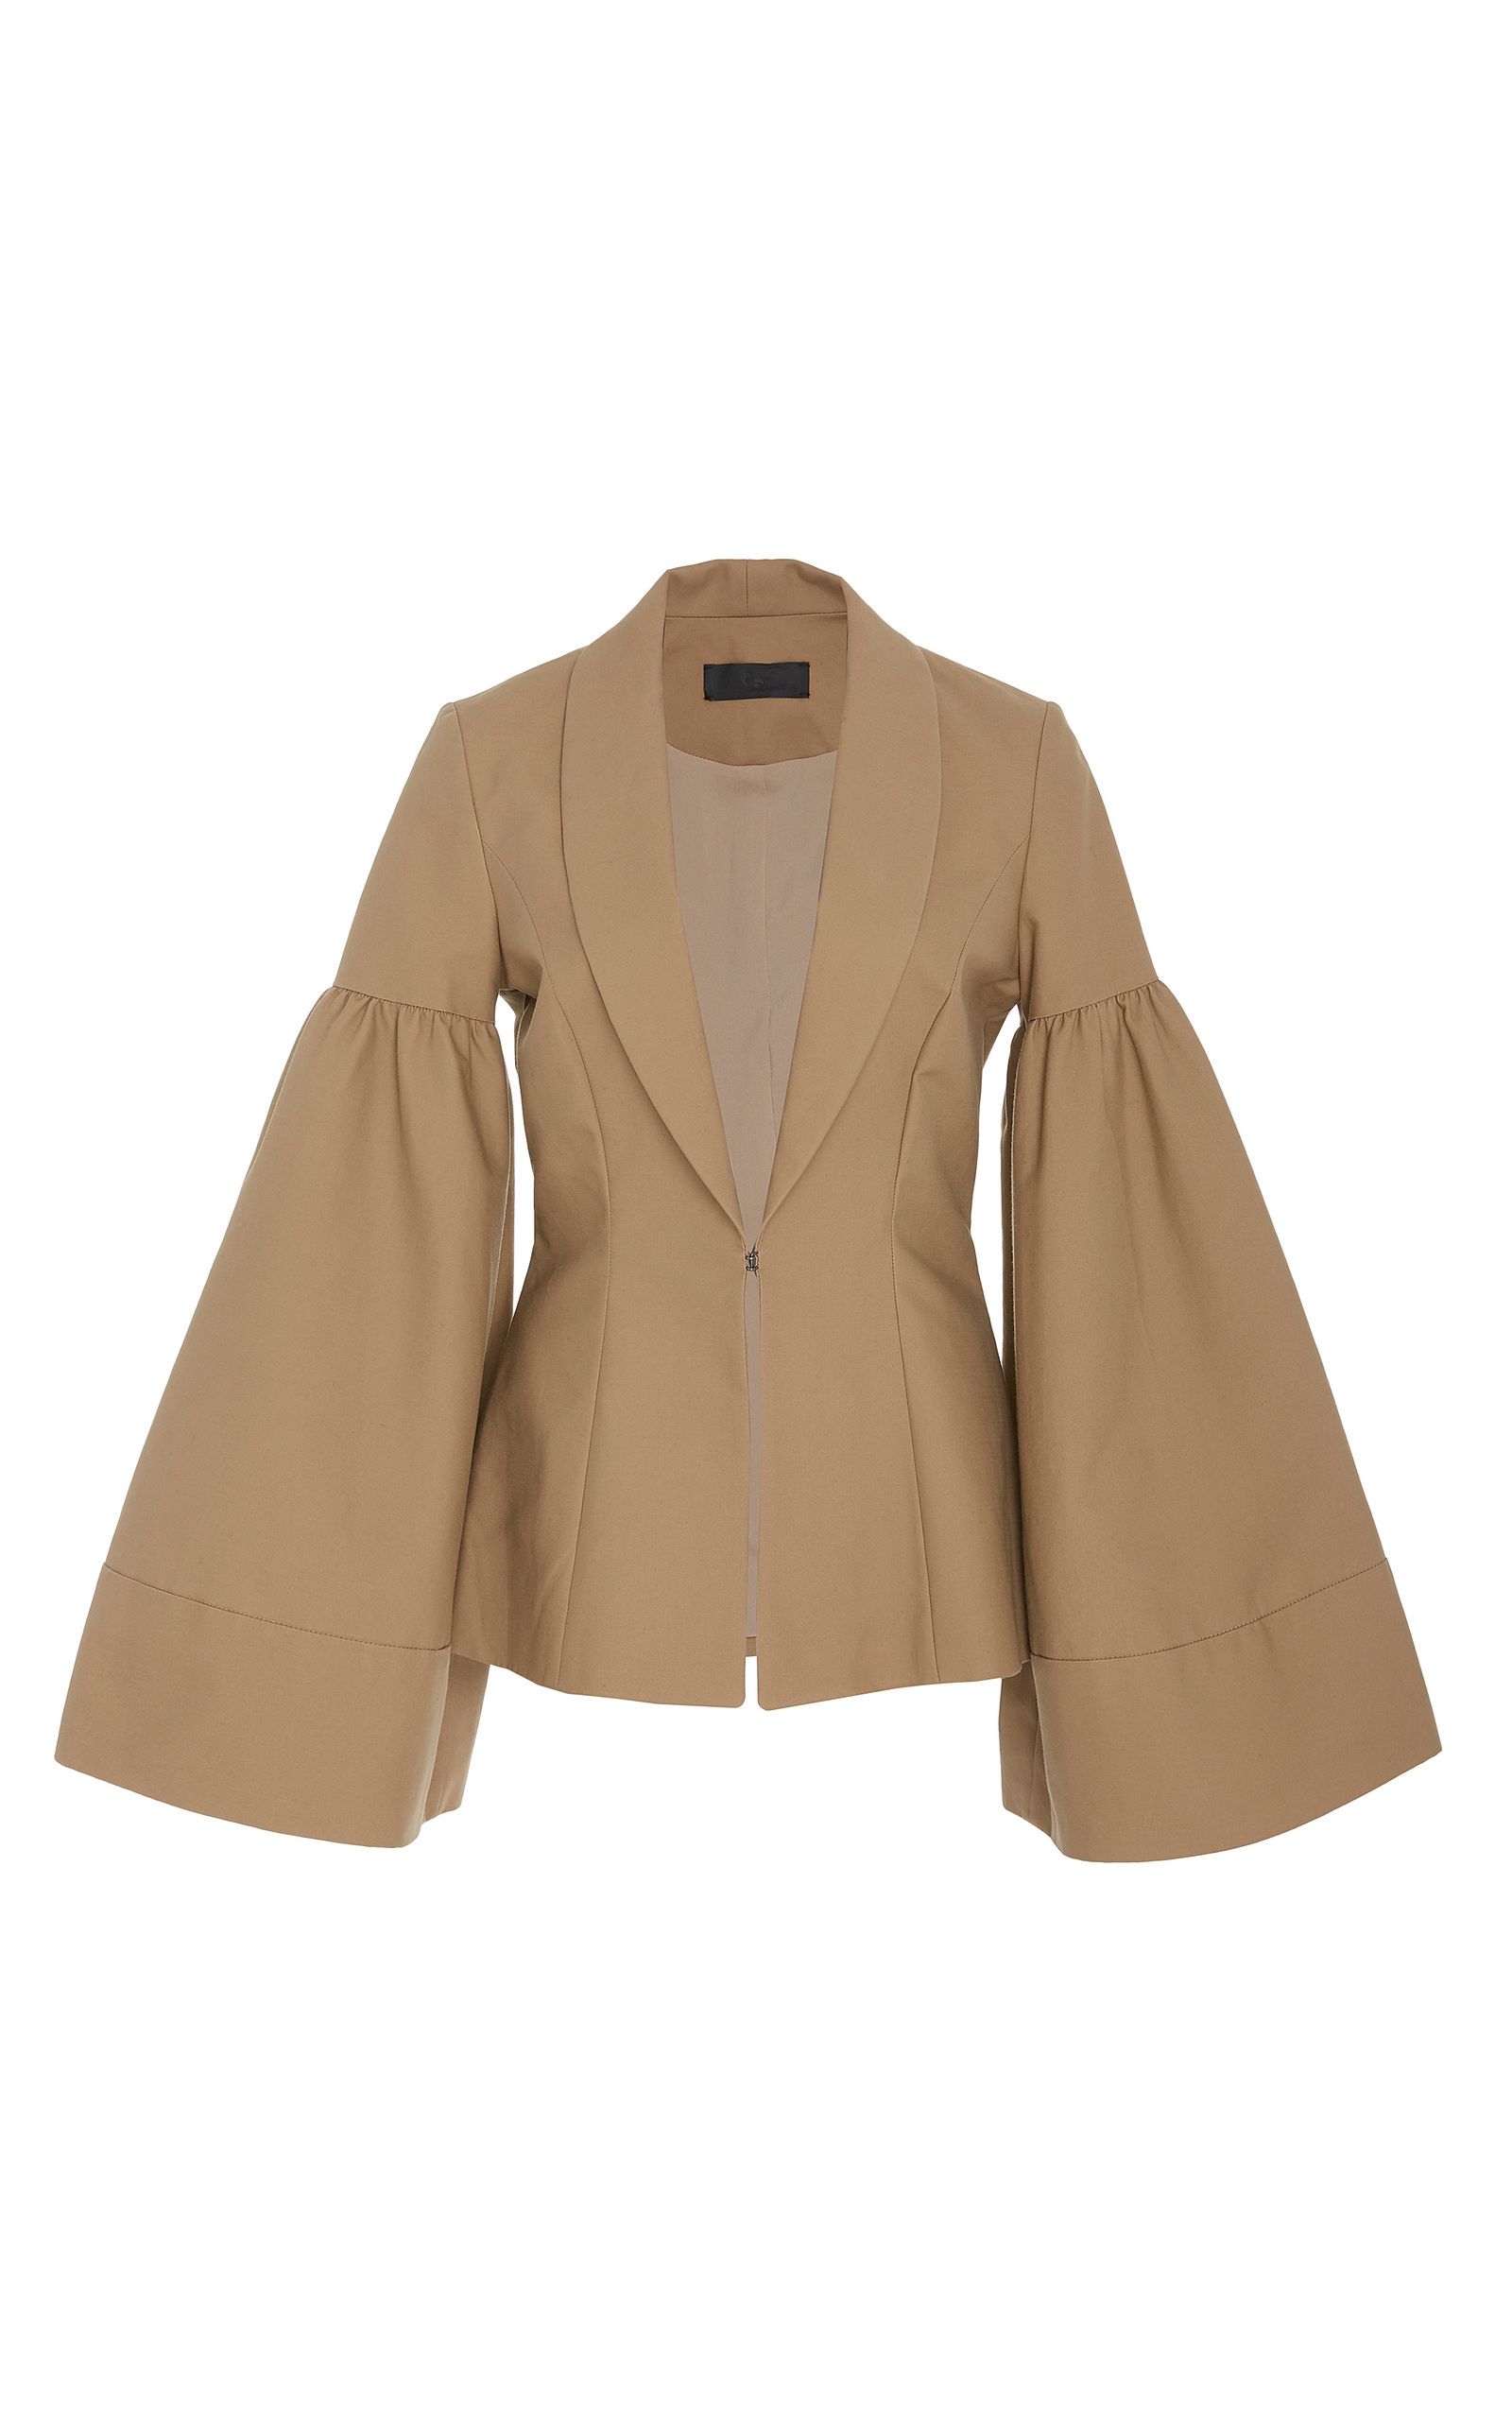 Timeless Chic: Elevating Your Look with Cotton Blazers